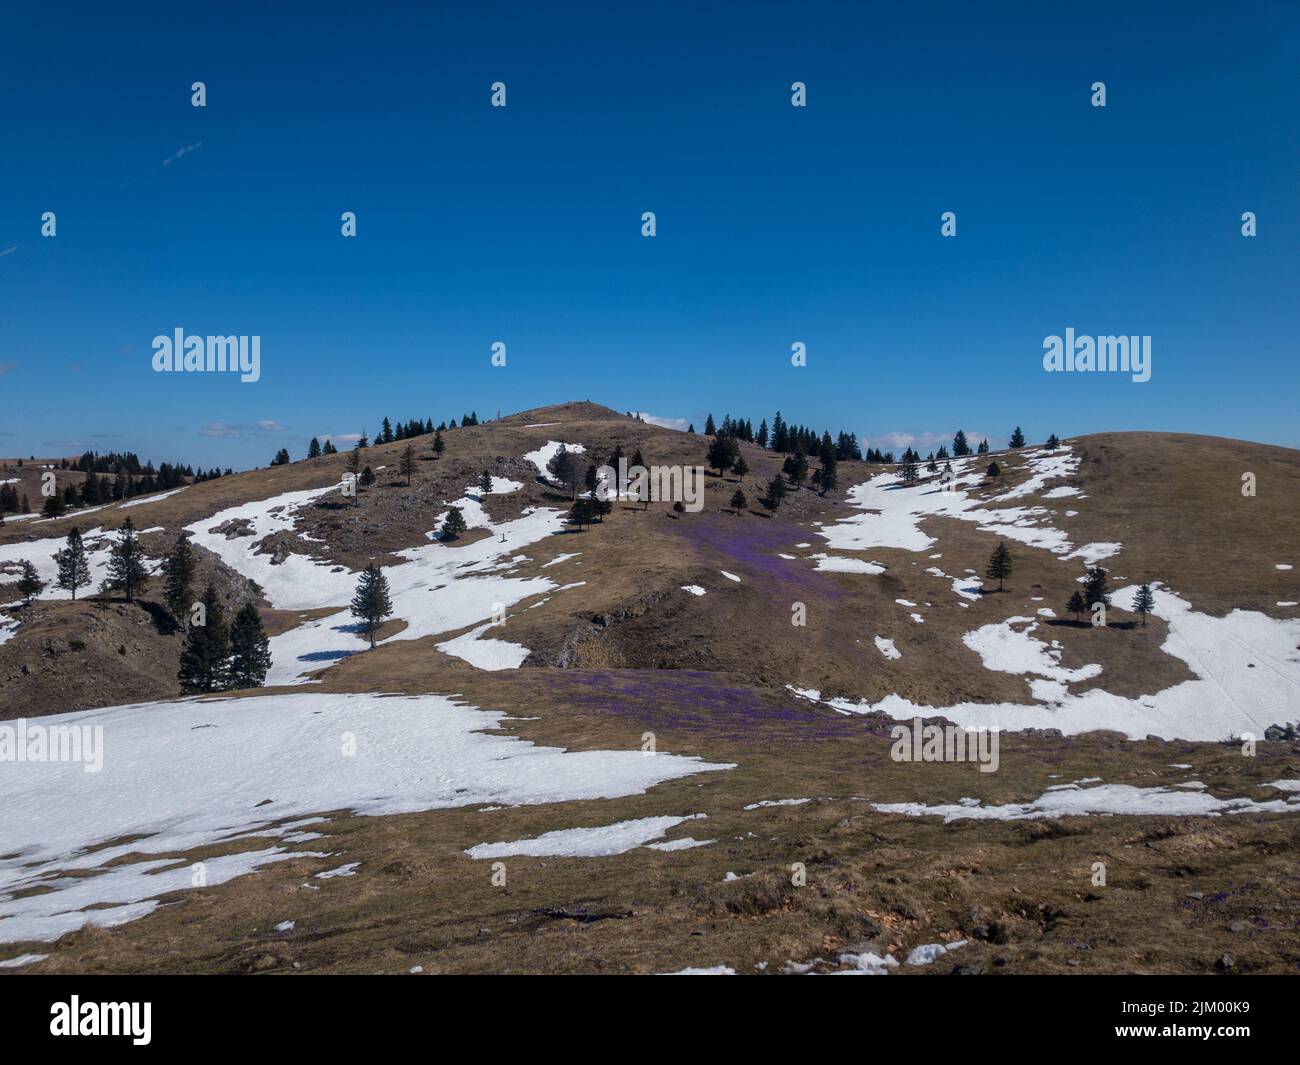 The endless fields of crocuses at Velika Planina, Slovenian Alps under a clear blue sky Stock Photo